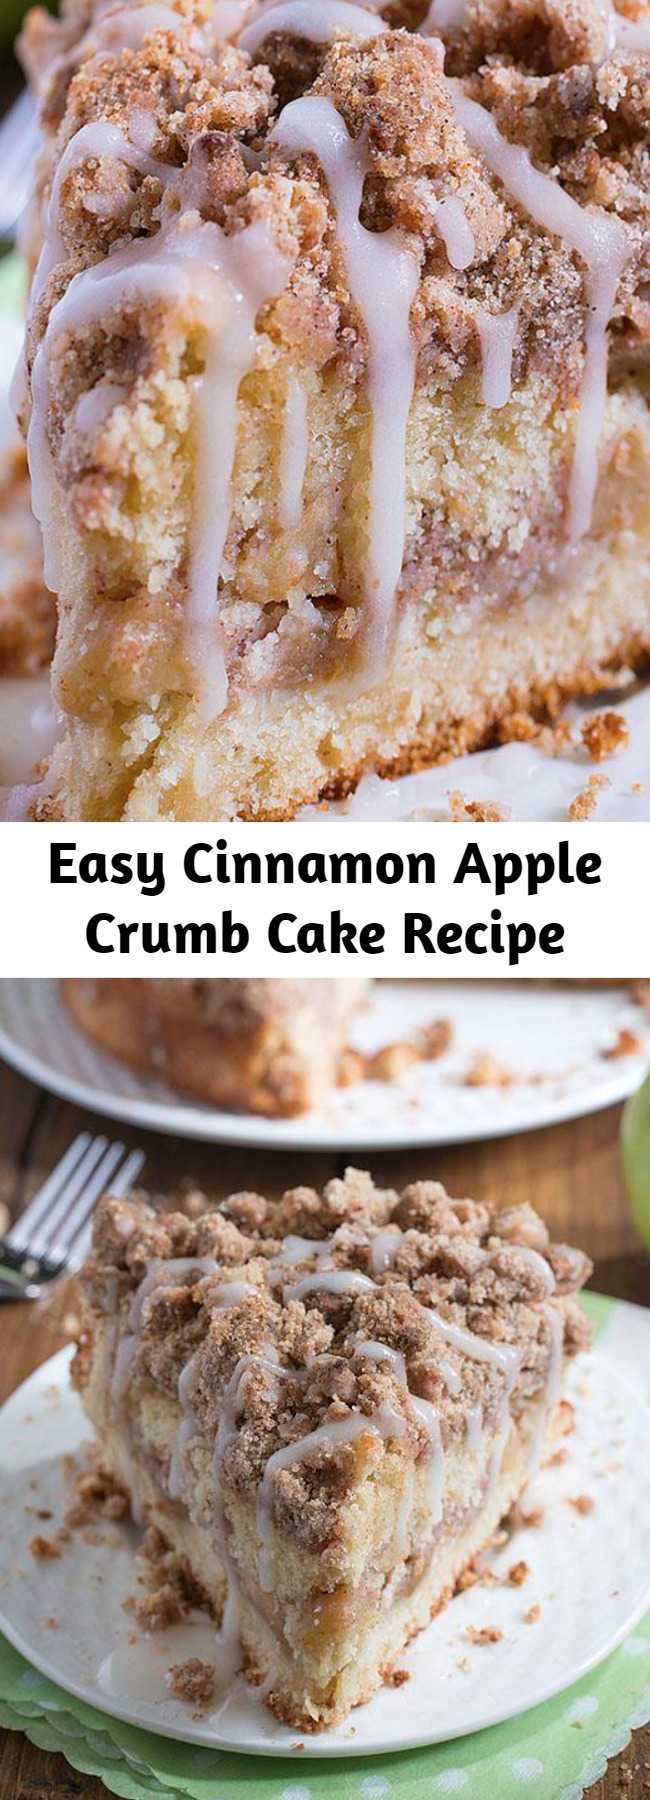 Easy Cinnamon Apple Crumb Cake Recipe - Are you ready for fall baking? Cinnamon Apple Crumb Cake is the perfect dessert for crisp weather coming up.